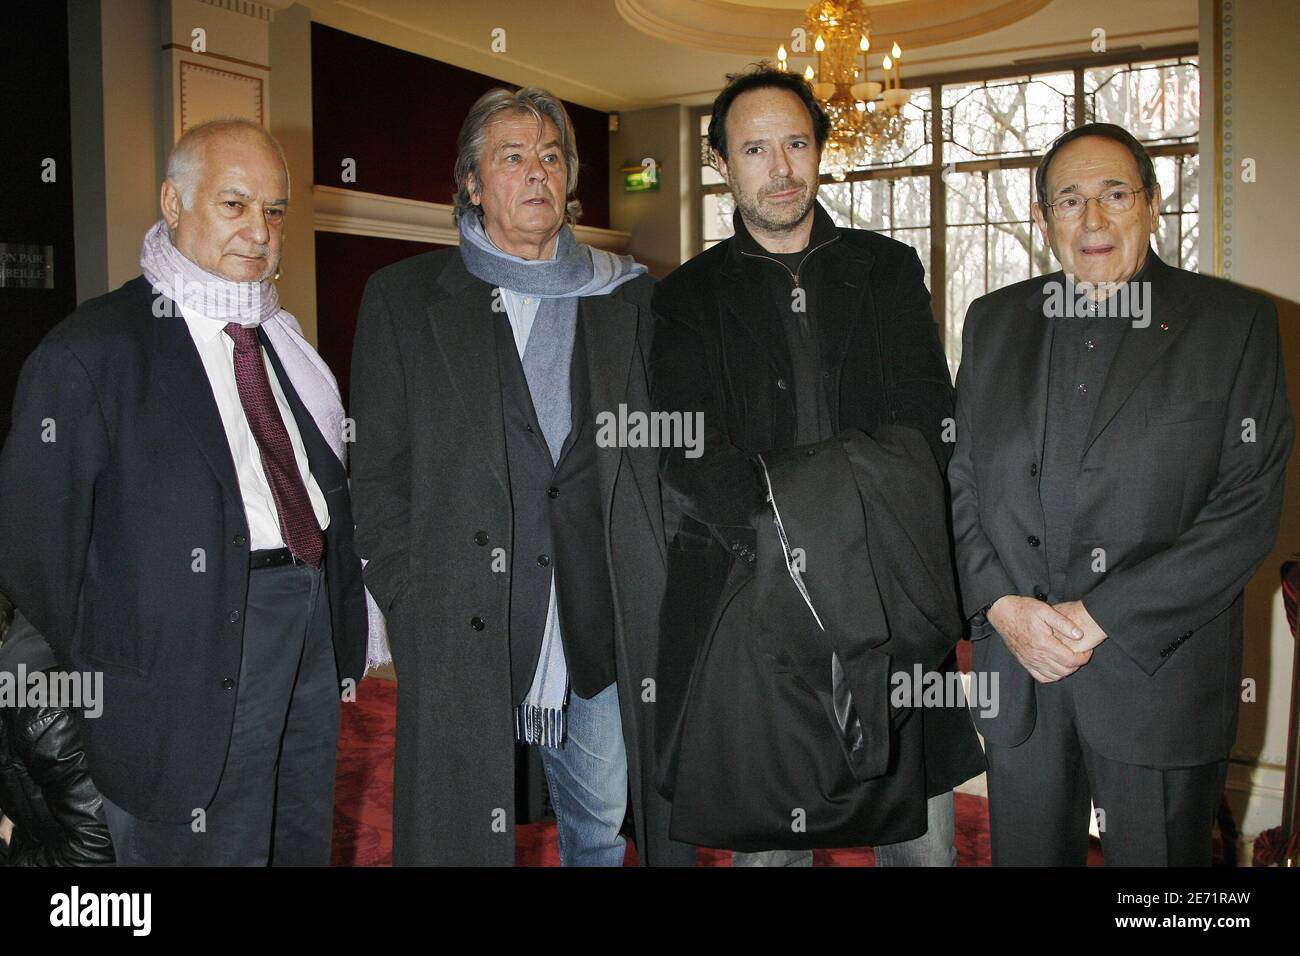 Jean-Claude Brialy, Alain Delon, Marc Levy and Robert Hossein at the  unveilling of a photography of Ingrid Betancourt on the front of 'Le  theatre Marigny' by Paris Mayor Bertrand Delanoe, in Paris,